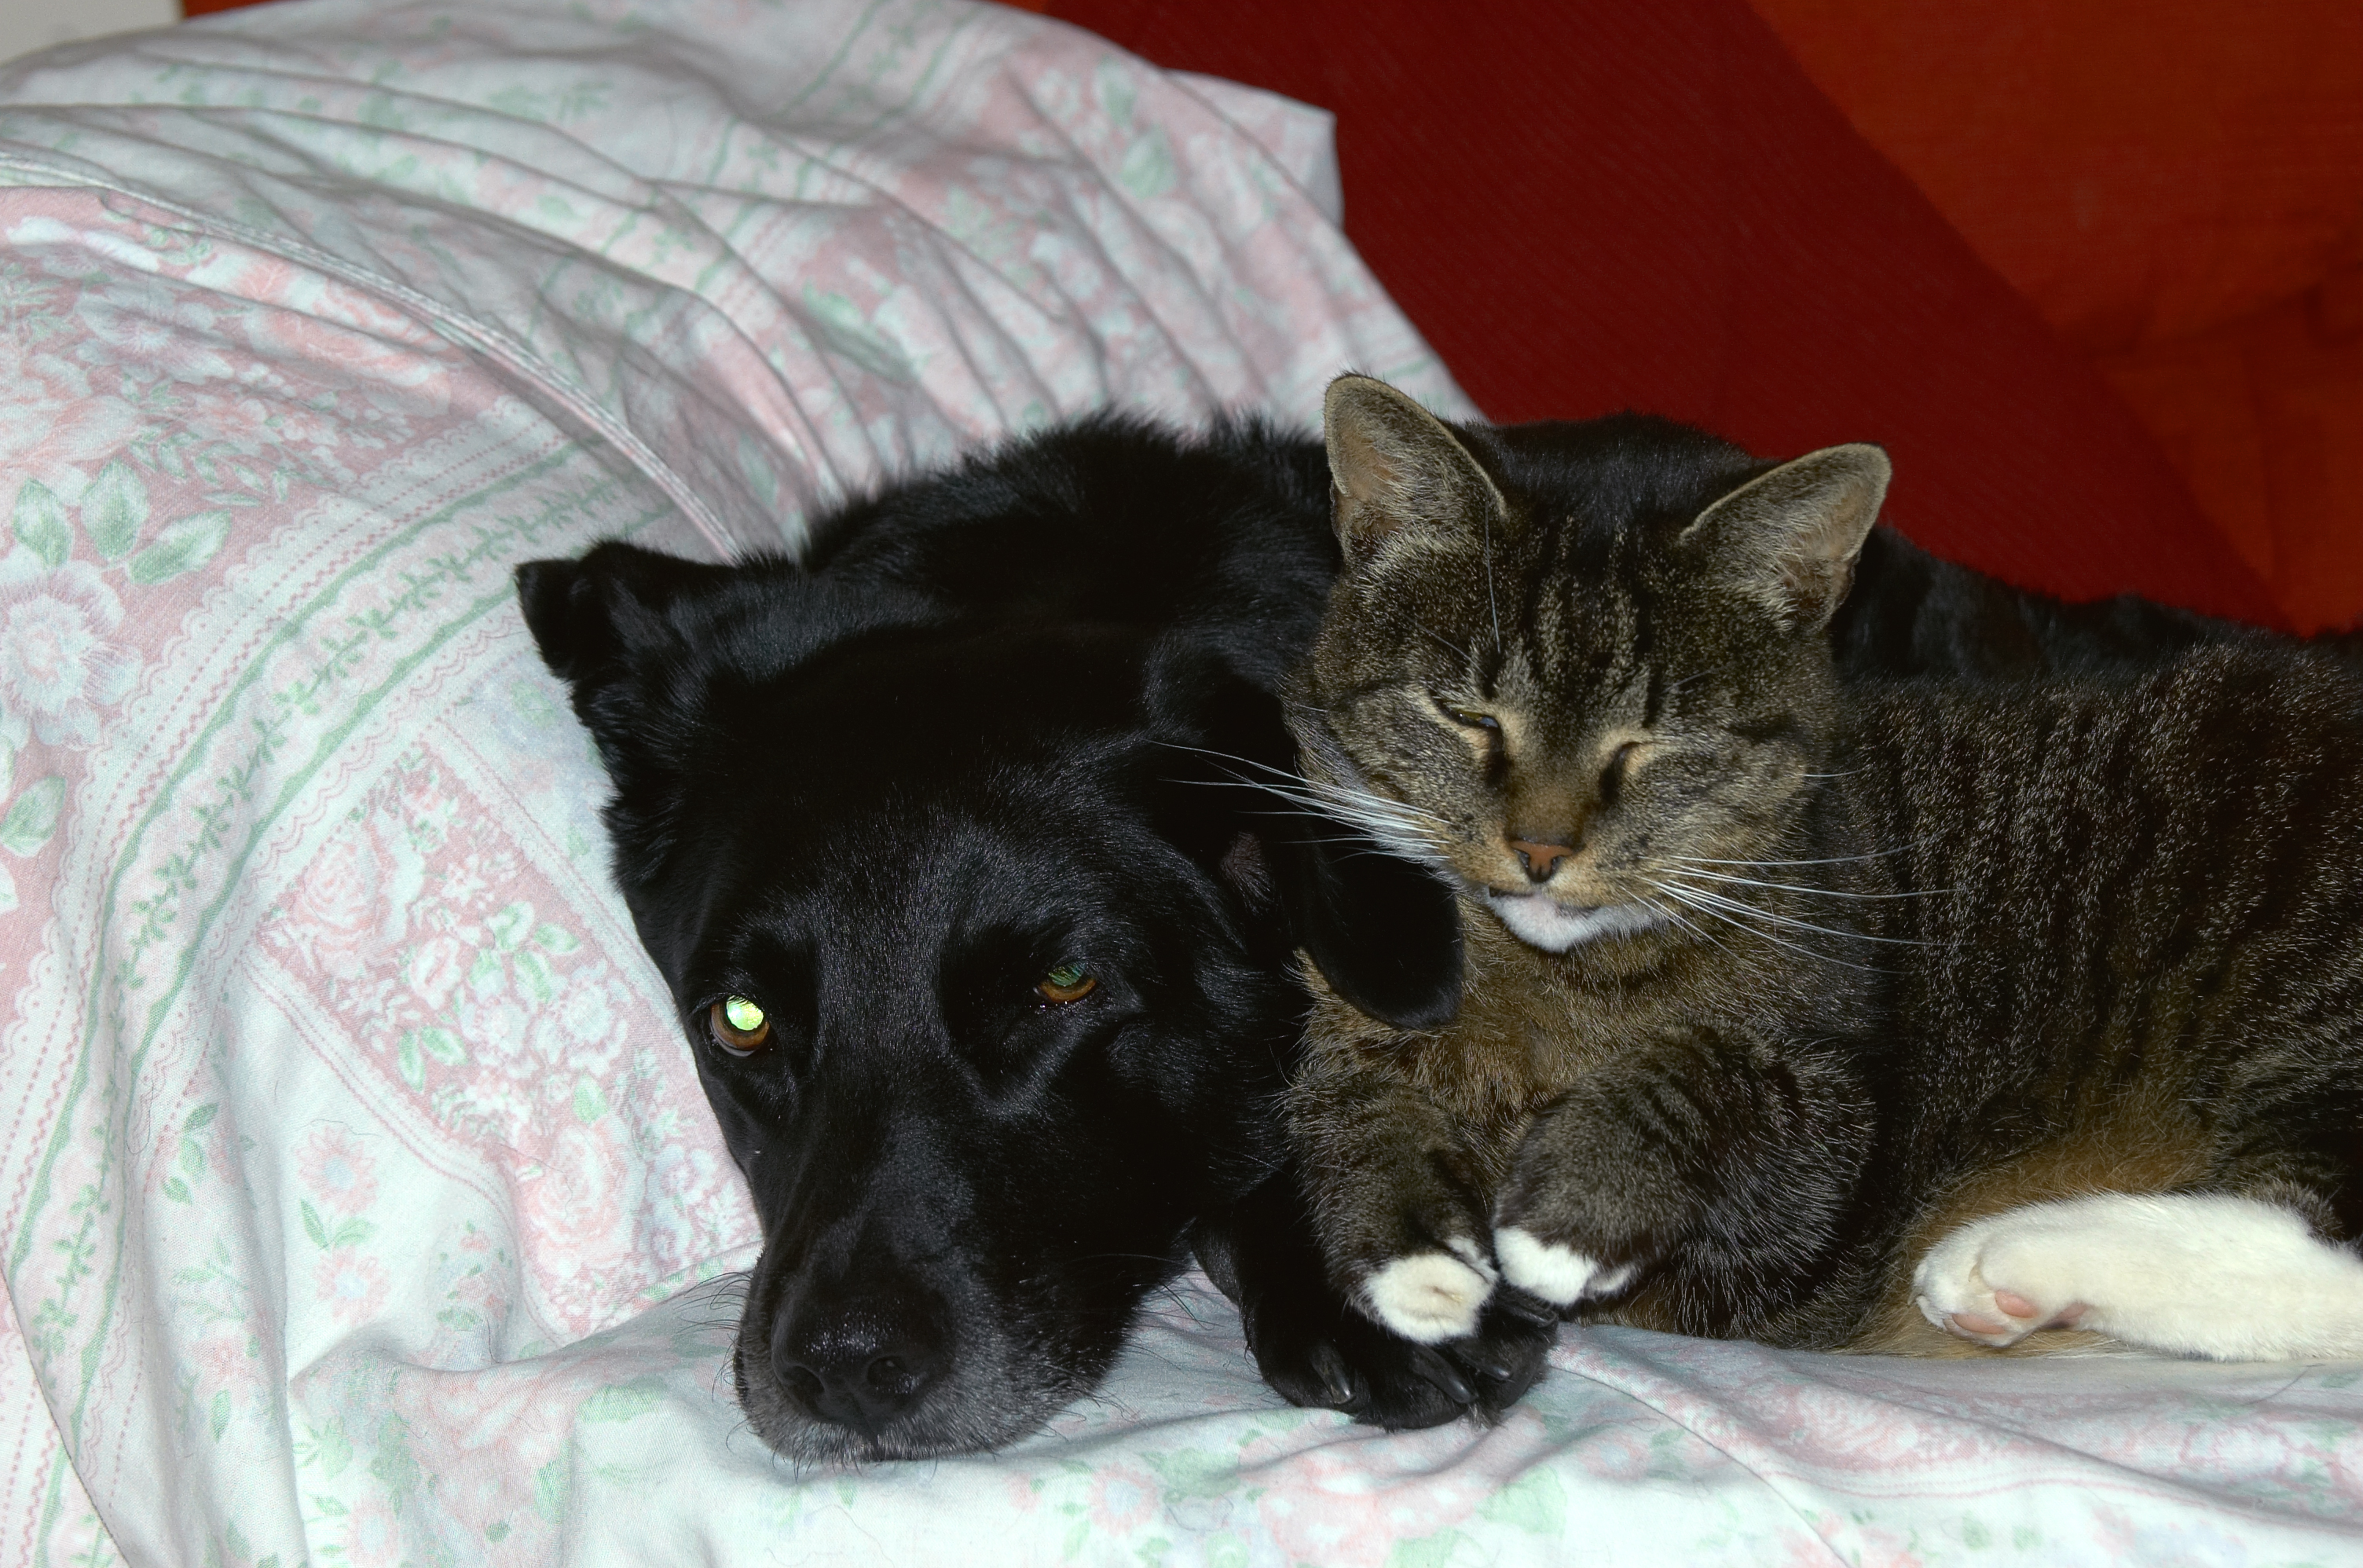 Cats & Dogs Living Together